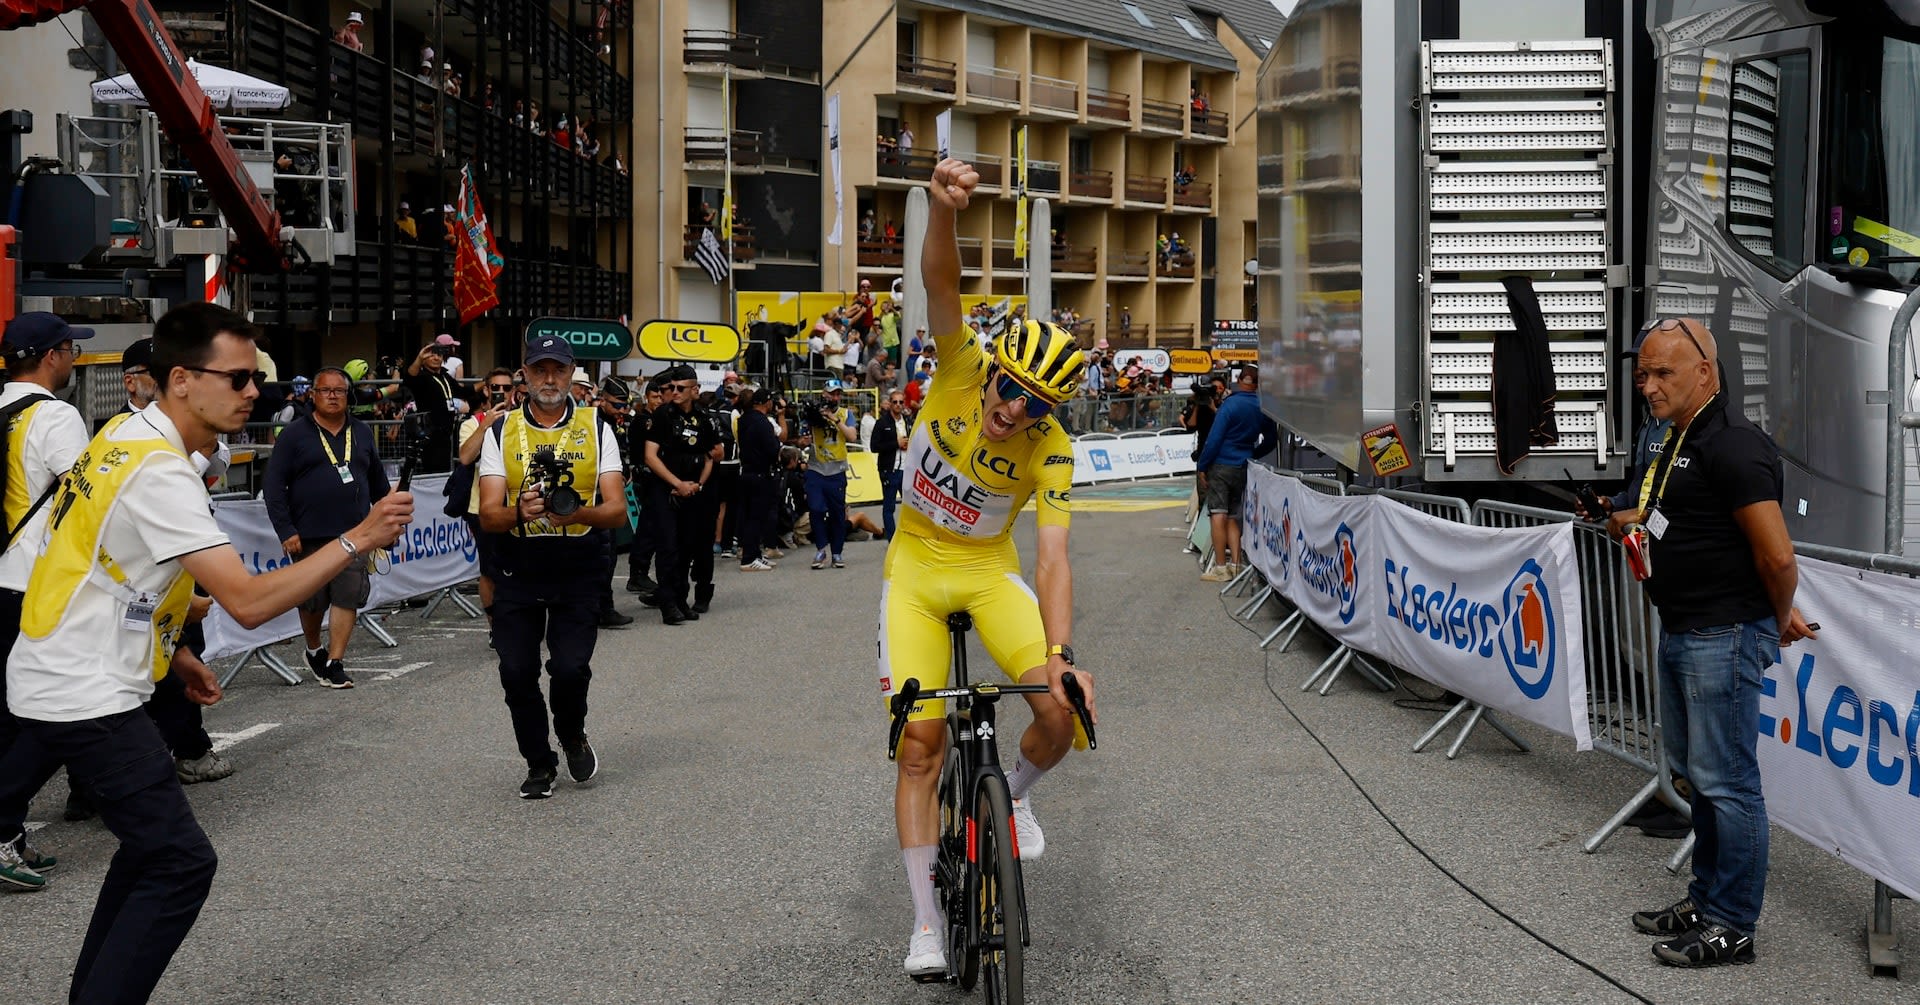 Pogacar wins Tour de France stage 14 in the Pyrenees